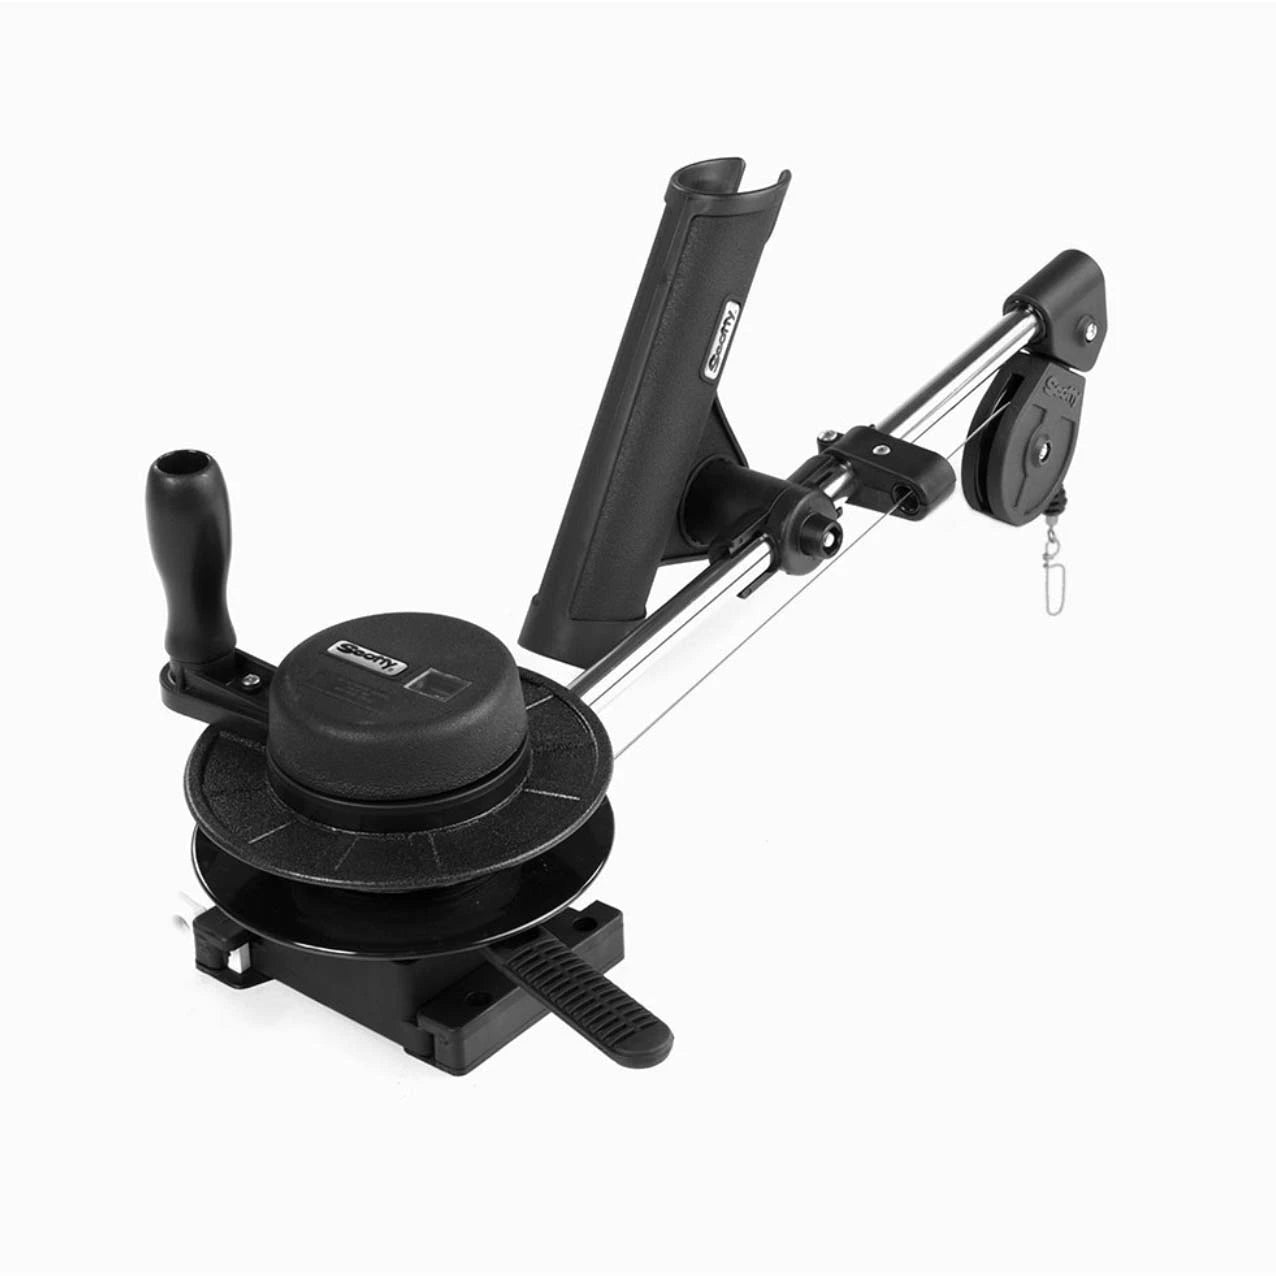 Scotty 1050 Compact Manual Downrigger Depthmaster 23"-Downriggers & Accessories-Scotty-Fishing Station